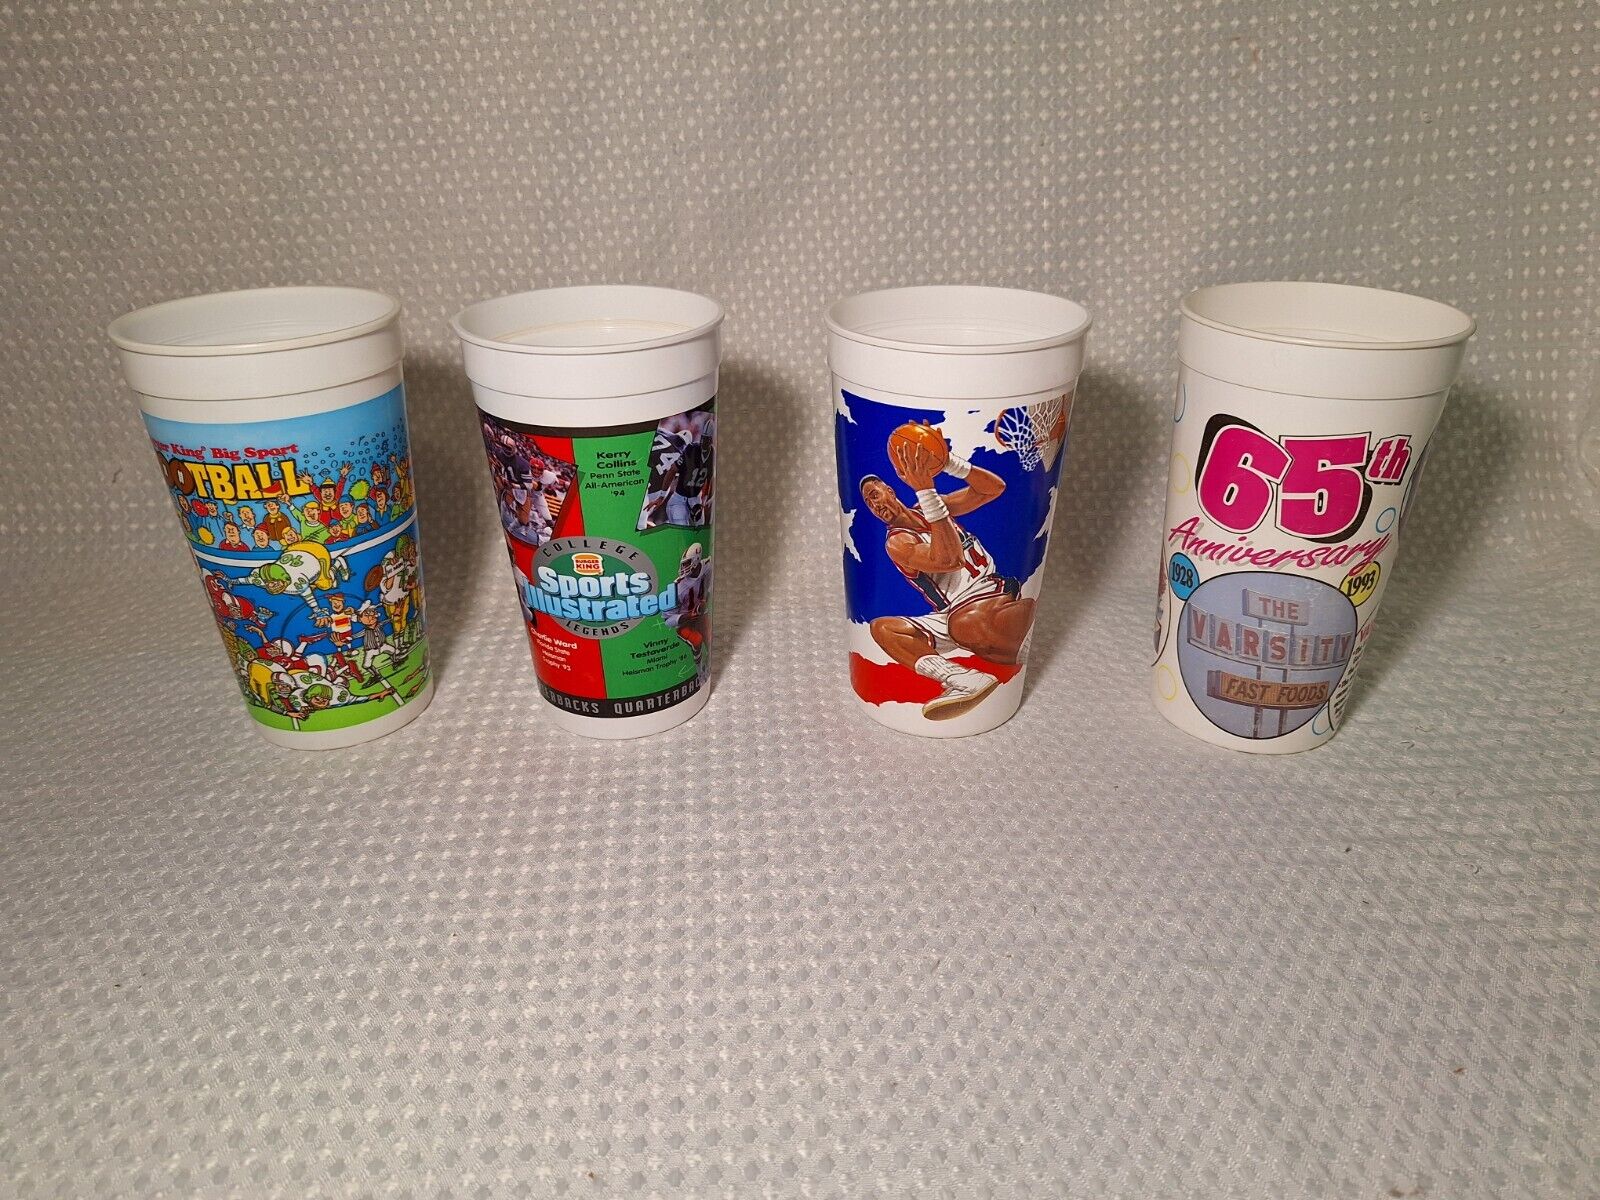 Vintage 1990s Burger King McDonalds Disposable Plastic Collector Cups Lot of 4